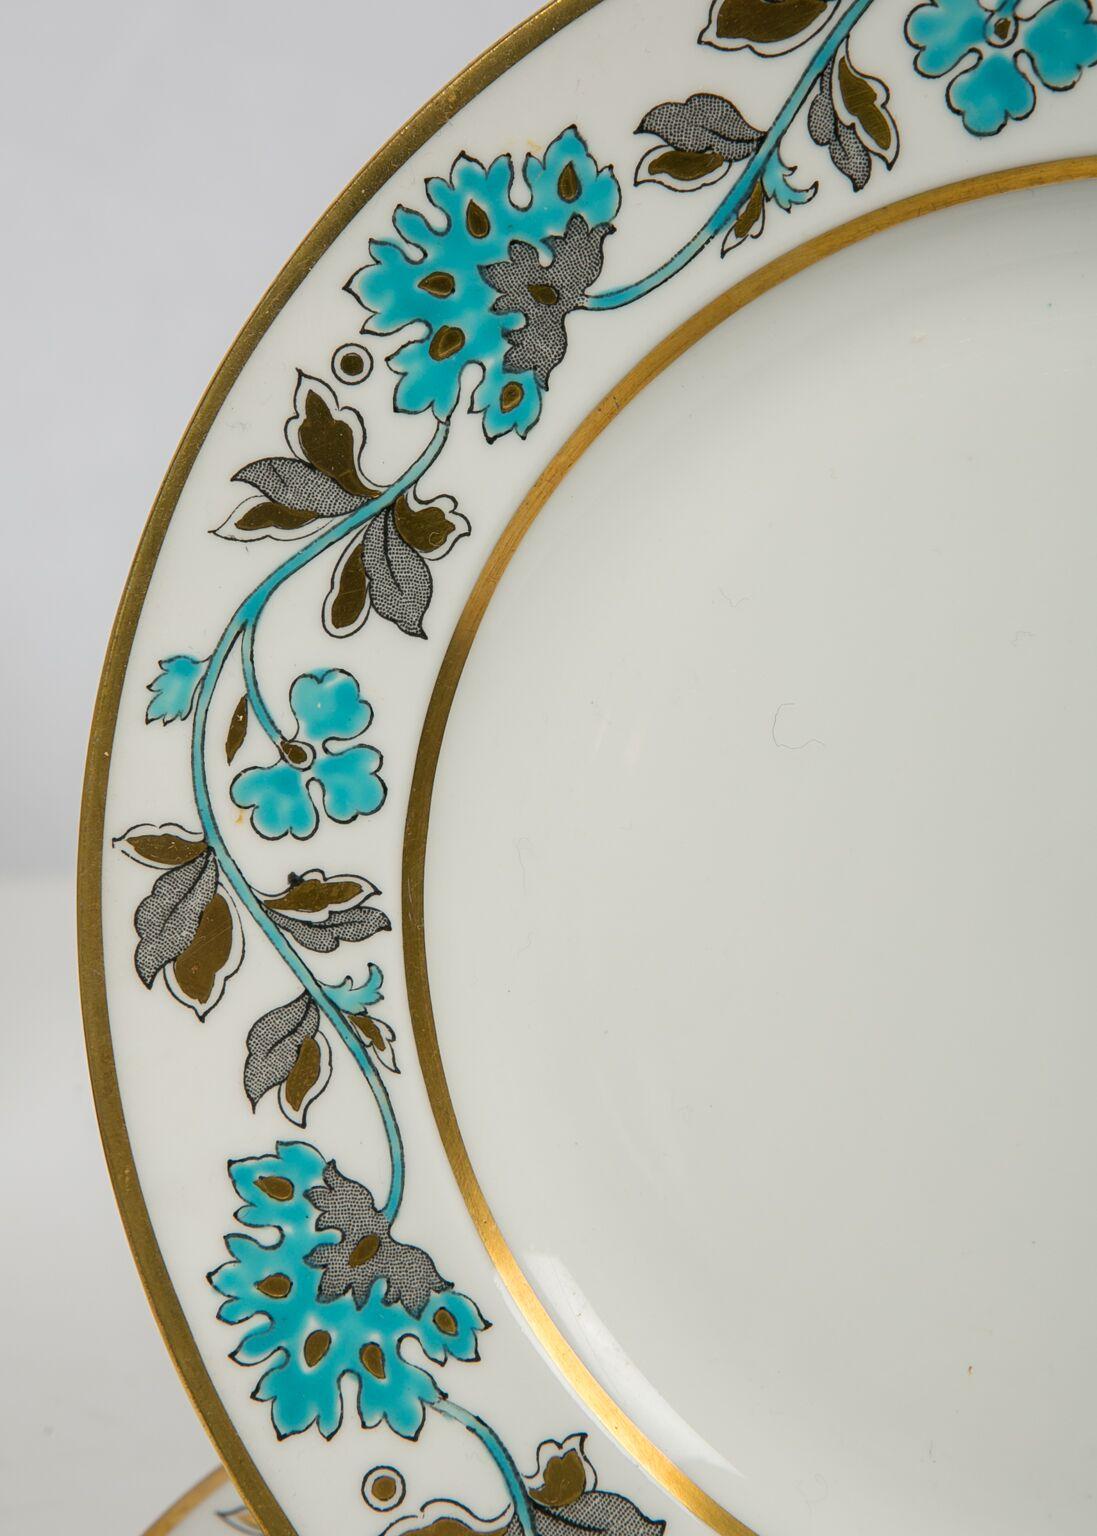 We are happy to offer this charming set of eight plates. They are richly enameled around the border with turquoise peonies, and turquoise, black, and gray leaves. The dishes are made of bone china which is thinner with a smoother glaze, and whiter